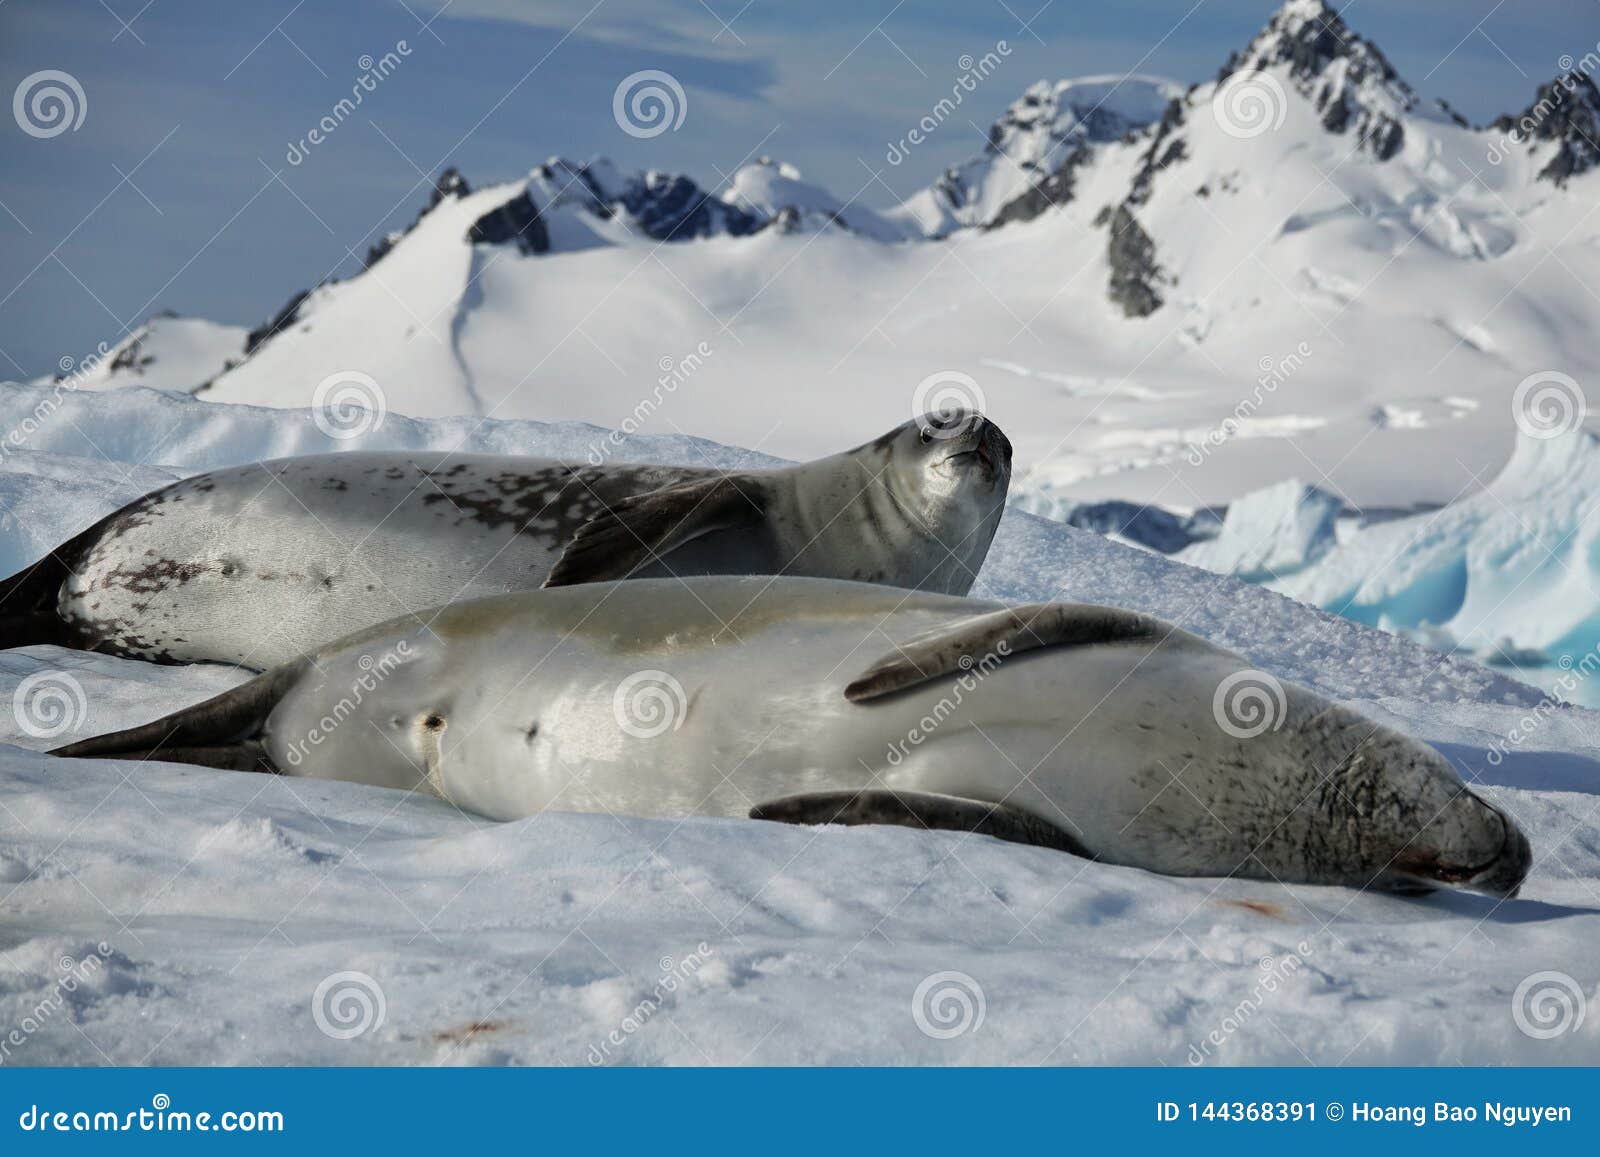 The Amazing Animals of Antarctica Stock Image - Image of areas, mountains:  144368391